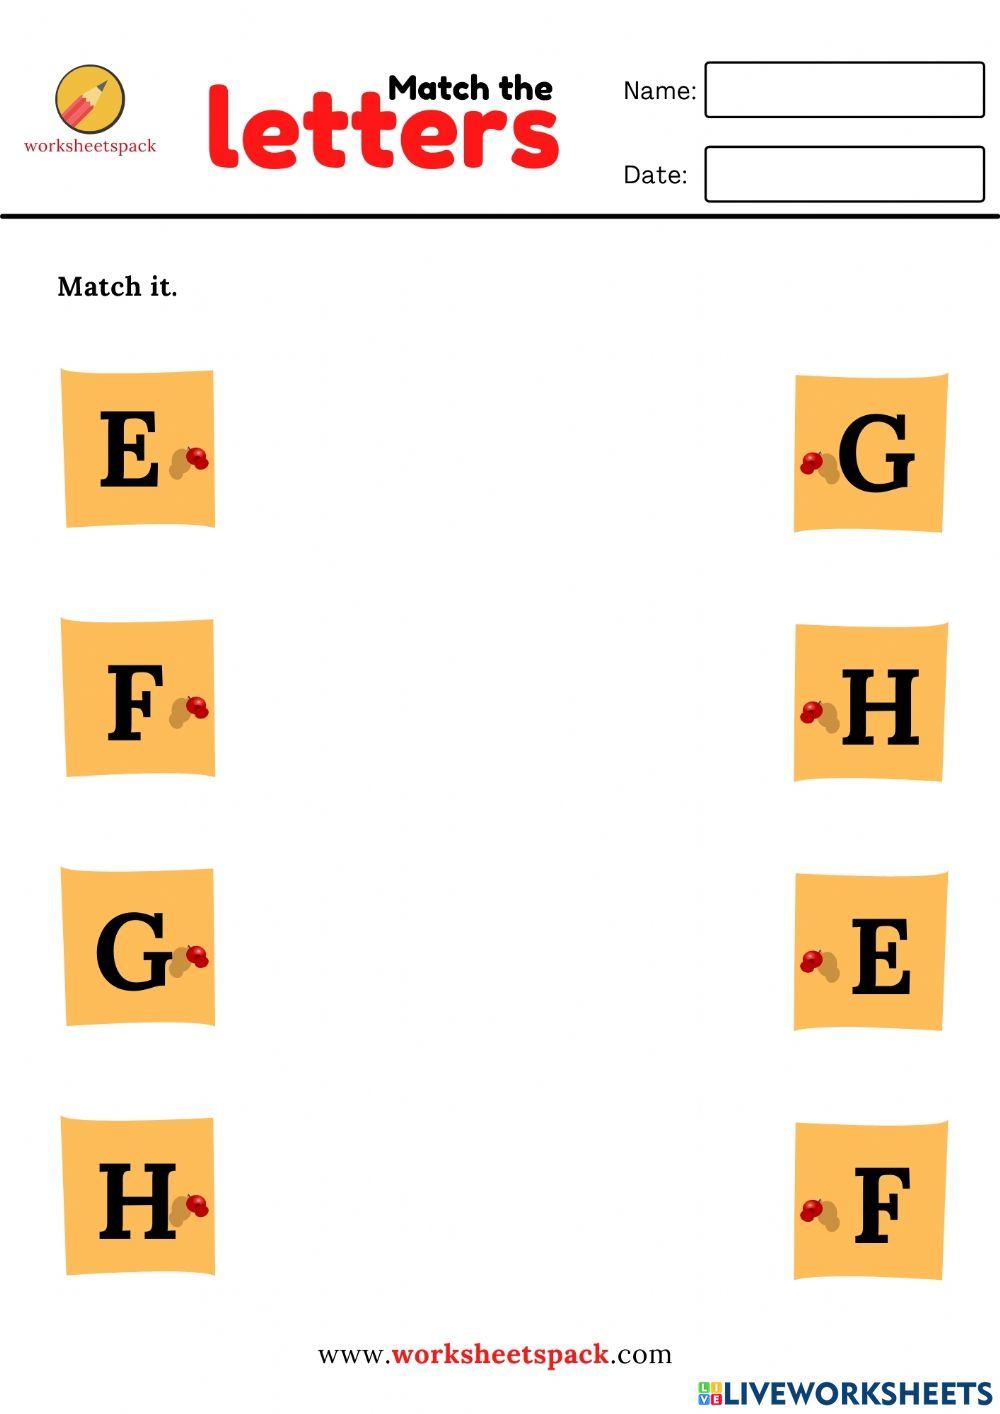 Alphabet matching worksheets - uppercase letters (E to H)